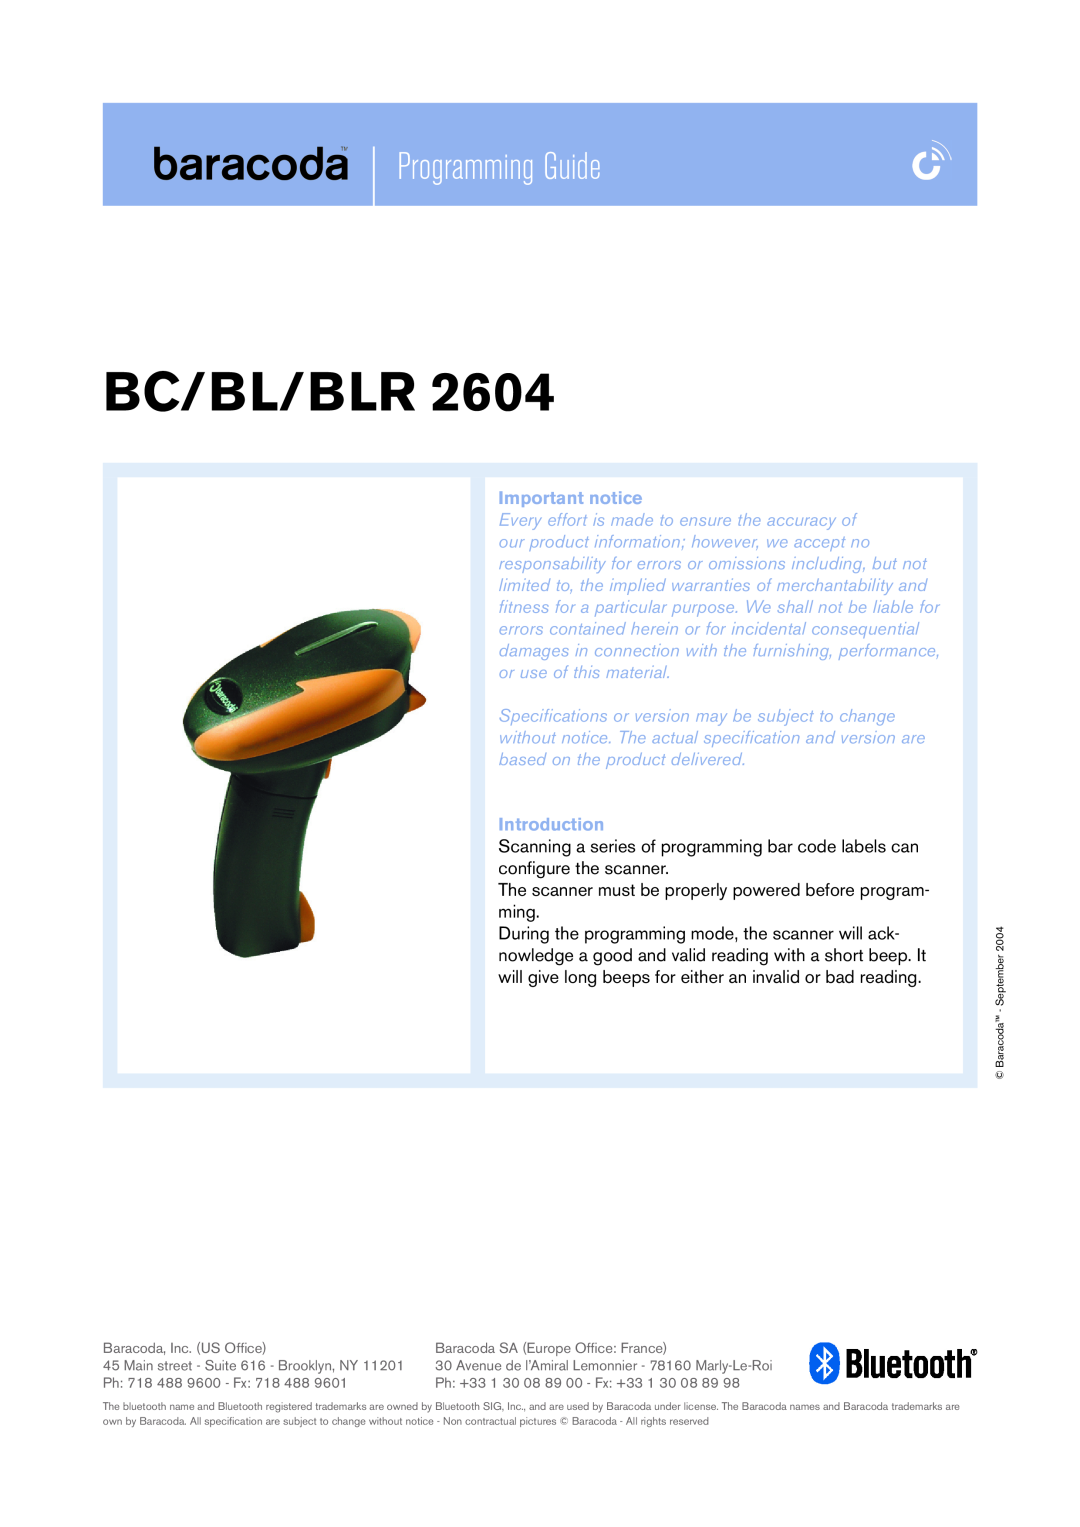 Baracoda BL2604, BLR2604, BC2604 specifications Bc/Bl/Blr, Programming Guide, Important notice, Introduction 